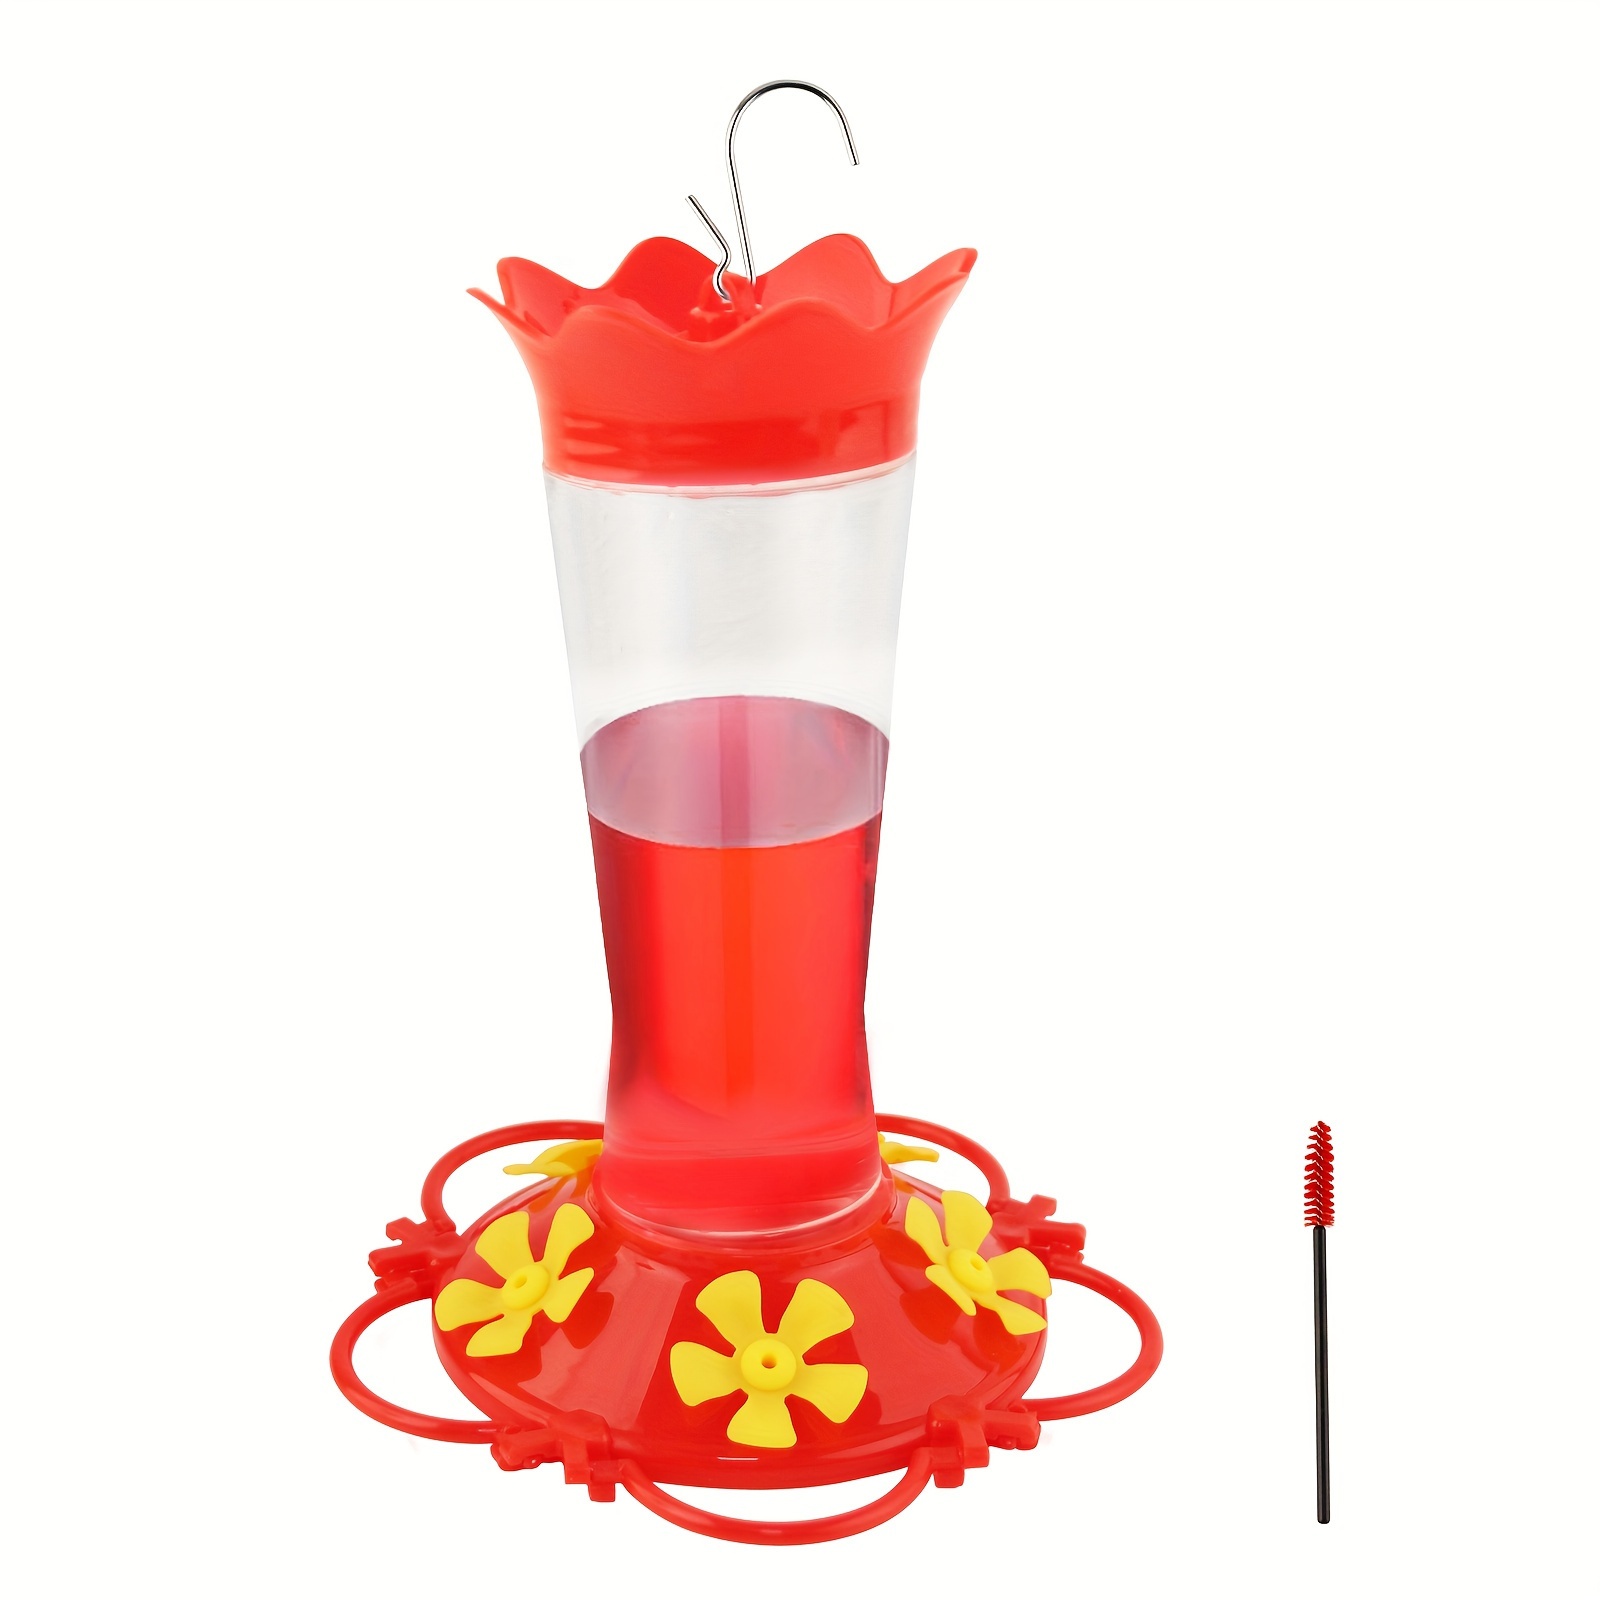 

Plastic Hummingbird Feeder With Built-in Wireless Charging, Ant & Bee Guard, 5 Feeding Ports, Leak-proof, Perch Design - Outdoor Hanging Bird Feeder With Wide Mouth For Easy Cleaning & Refilling